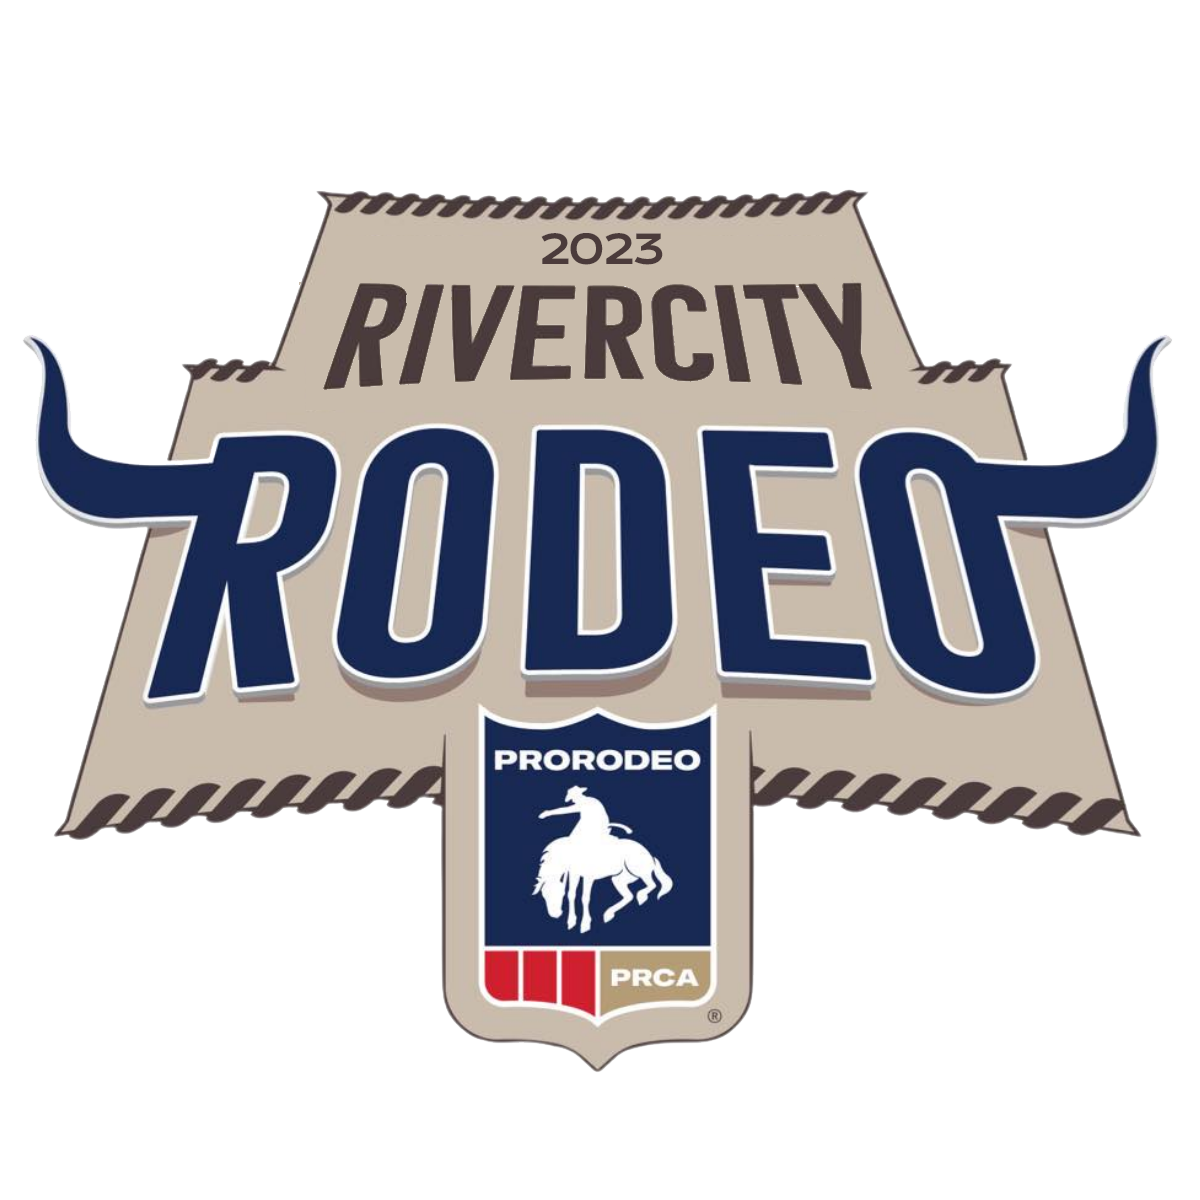 Evansville's River City Rodeo